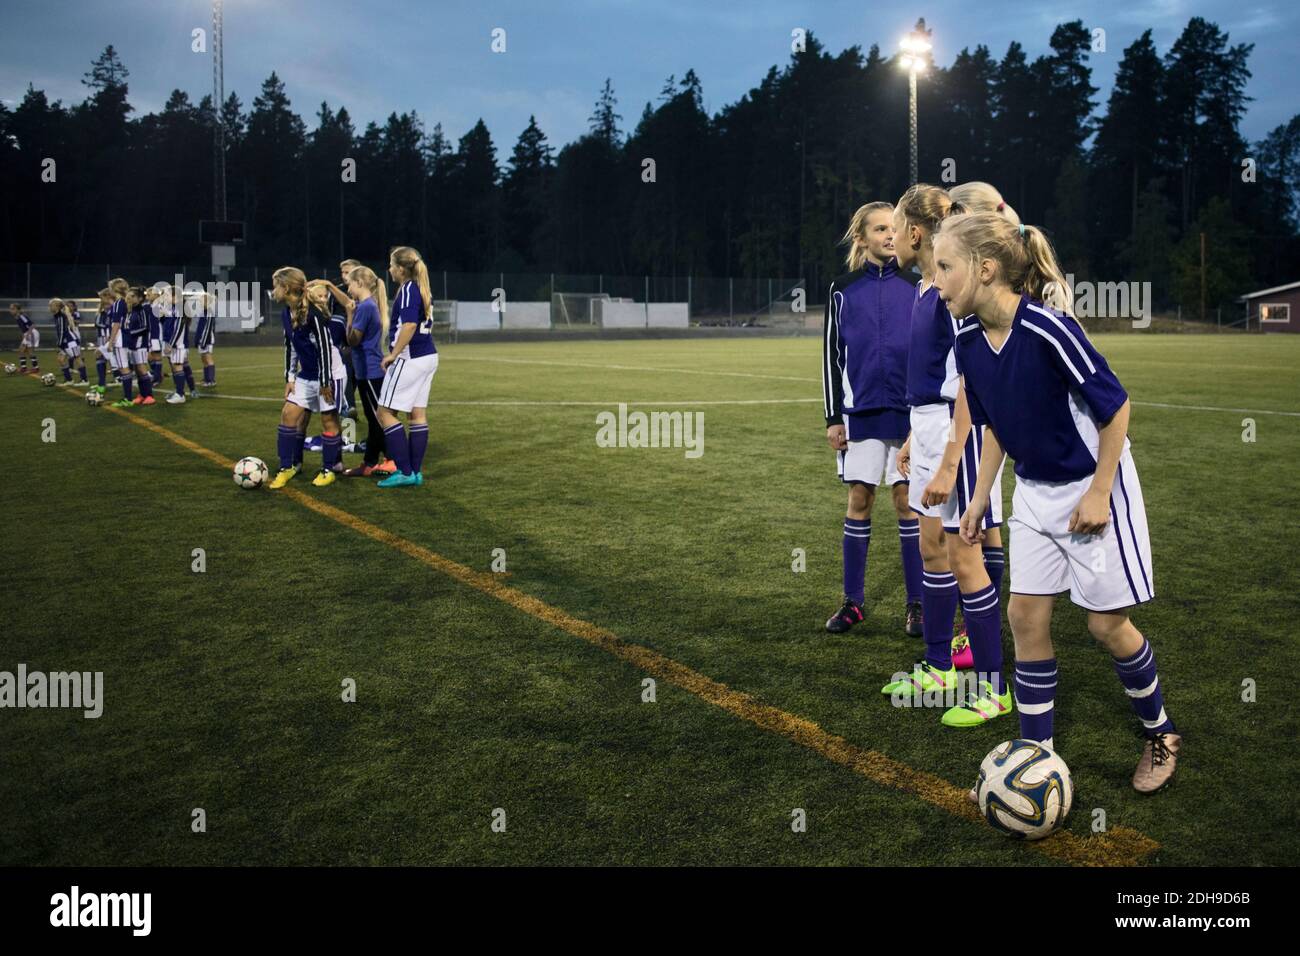 Girls standing with soccer balls on field Stock Photo